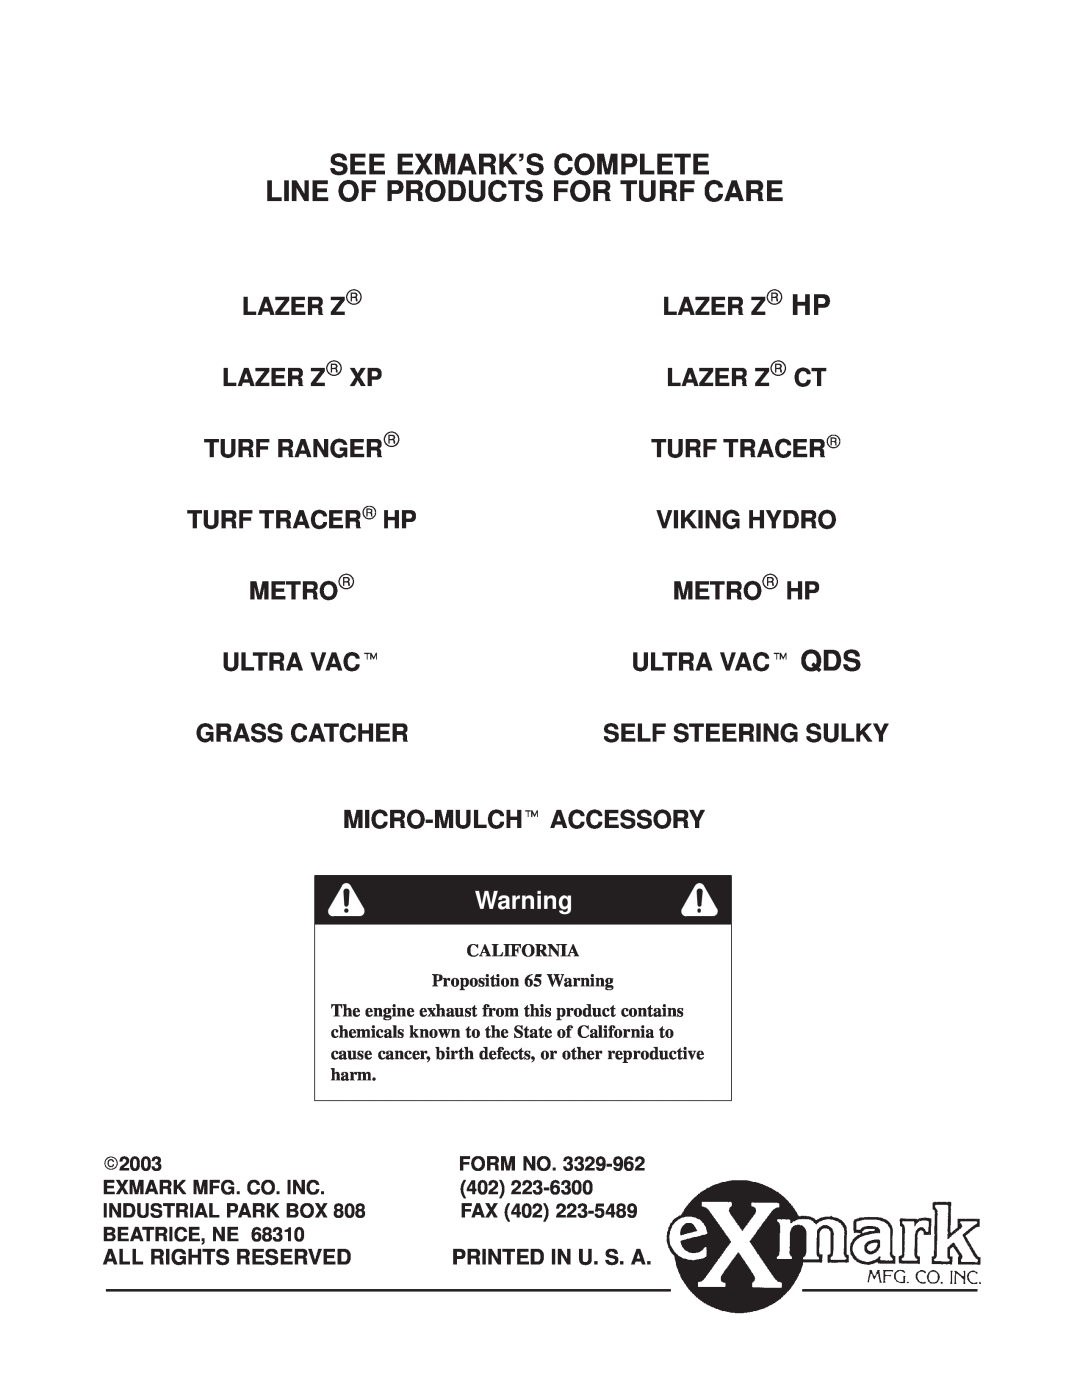 Exmark M216KA, M216KASP manual See Exmarks Complete Line Of Products For Turf Care, Lazer Z  Xp, Ultra Vac Qds, 2003, Fax 